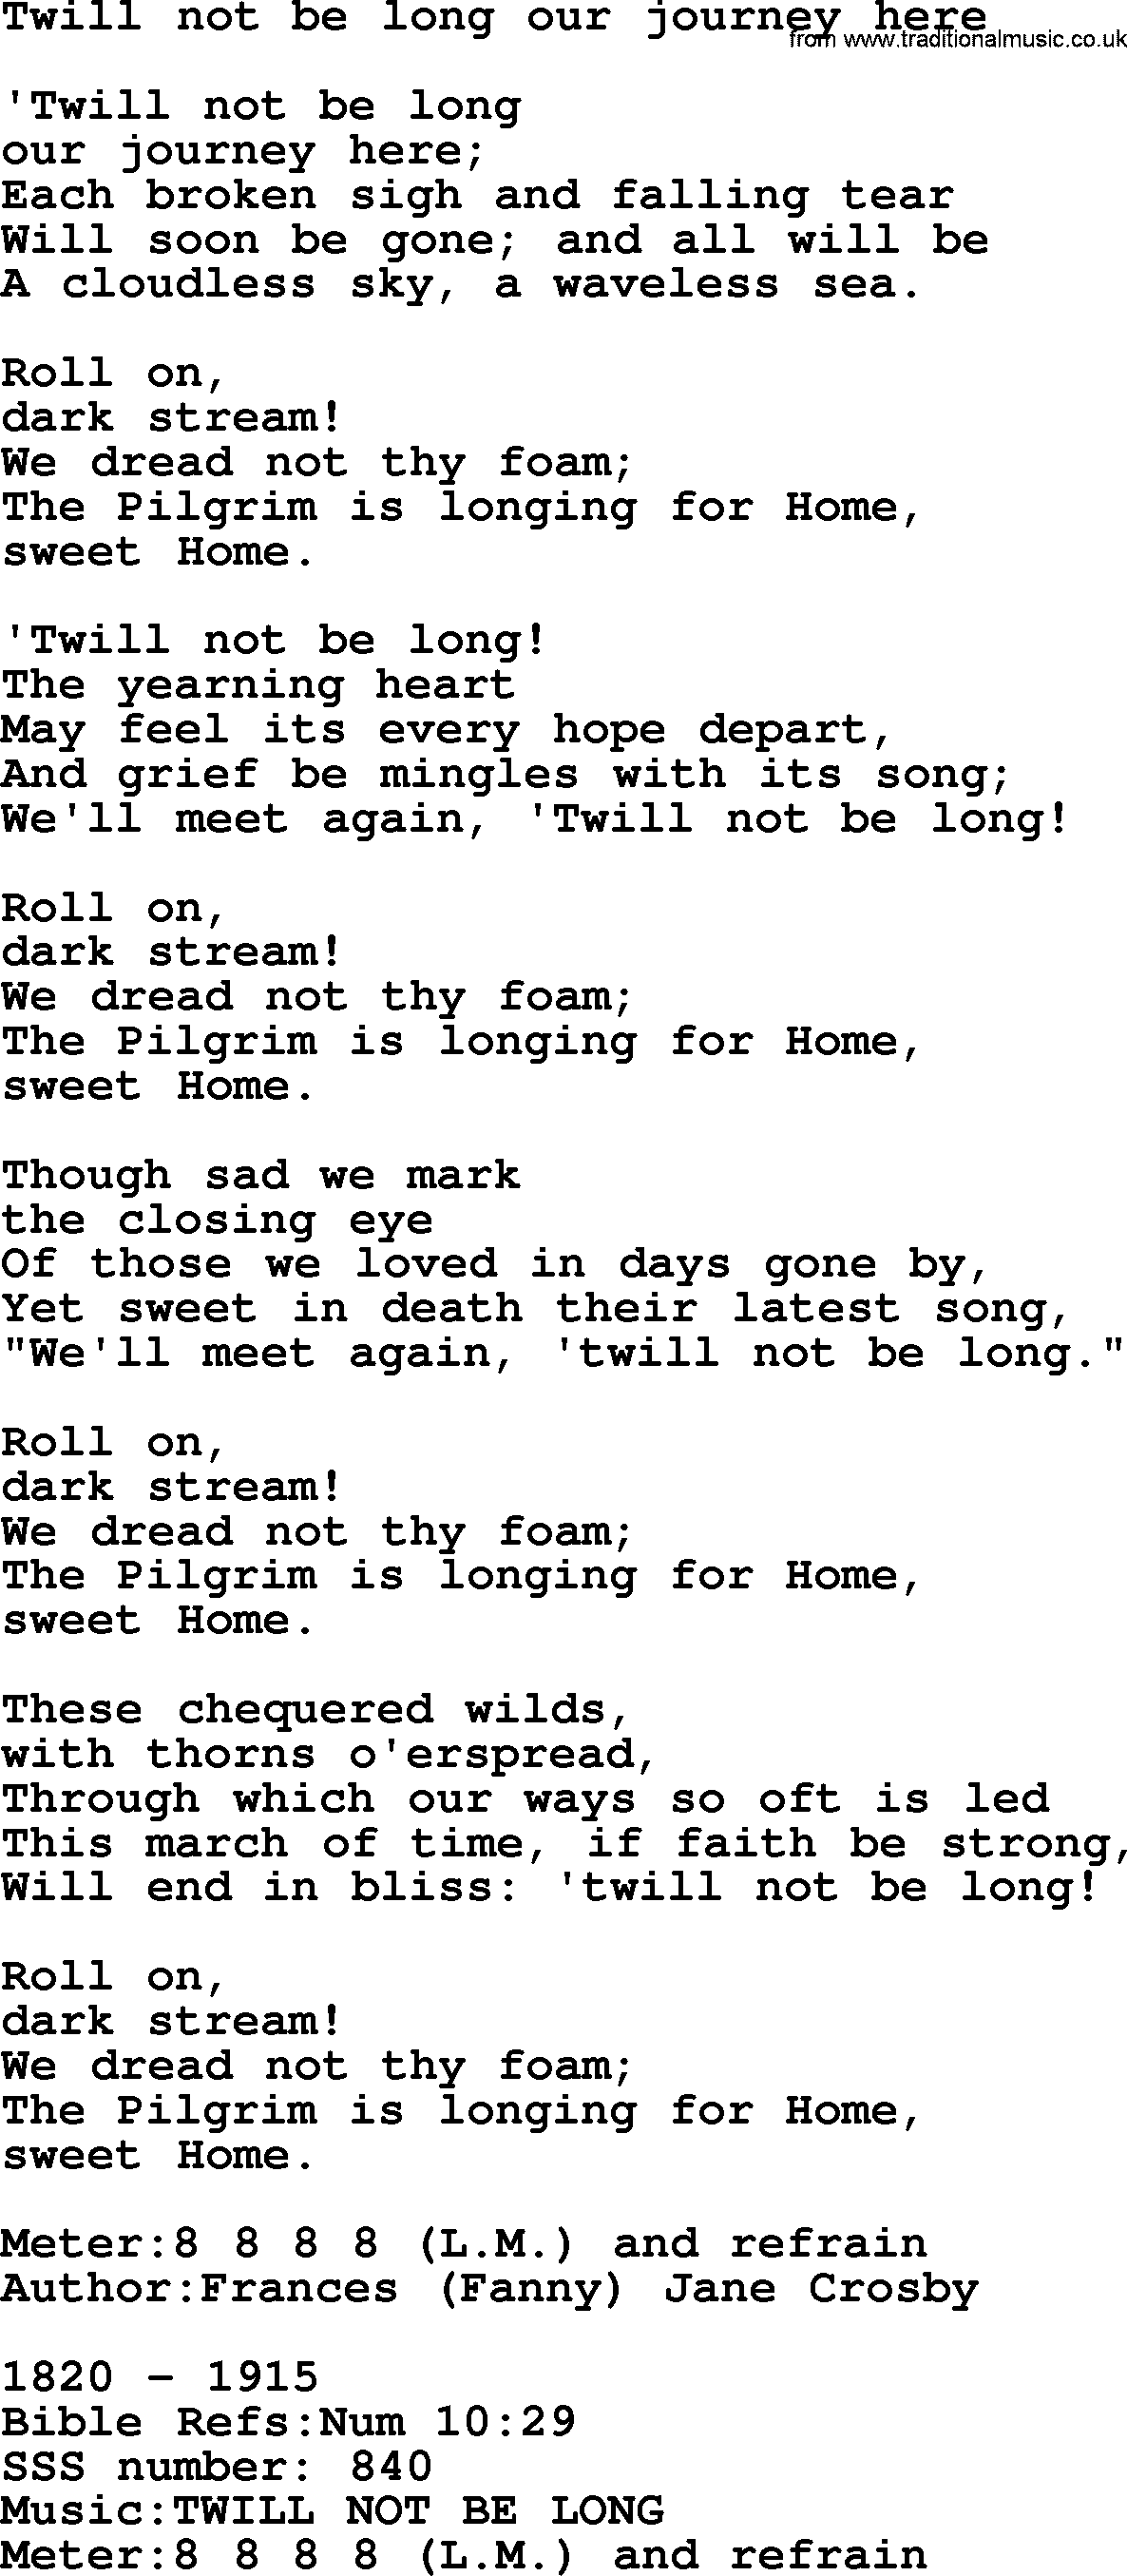 Sacred Songs and Solos complete, 1200 Hymns, title: Twill Not Be Long Our Journey Here, lyrics and PDF